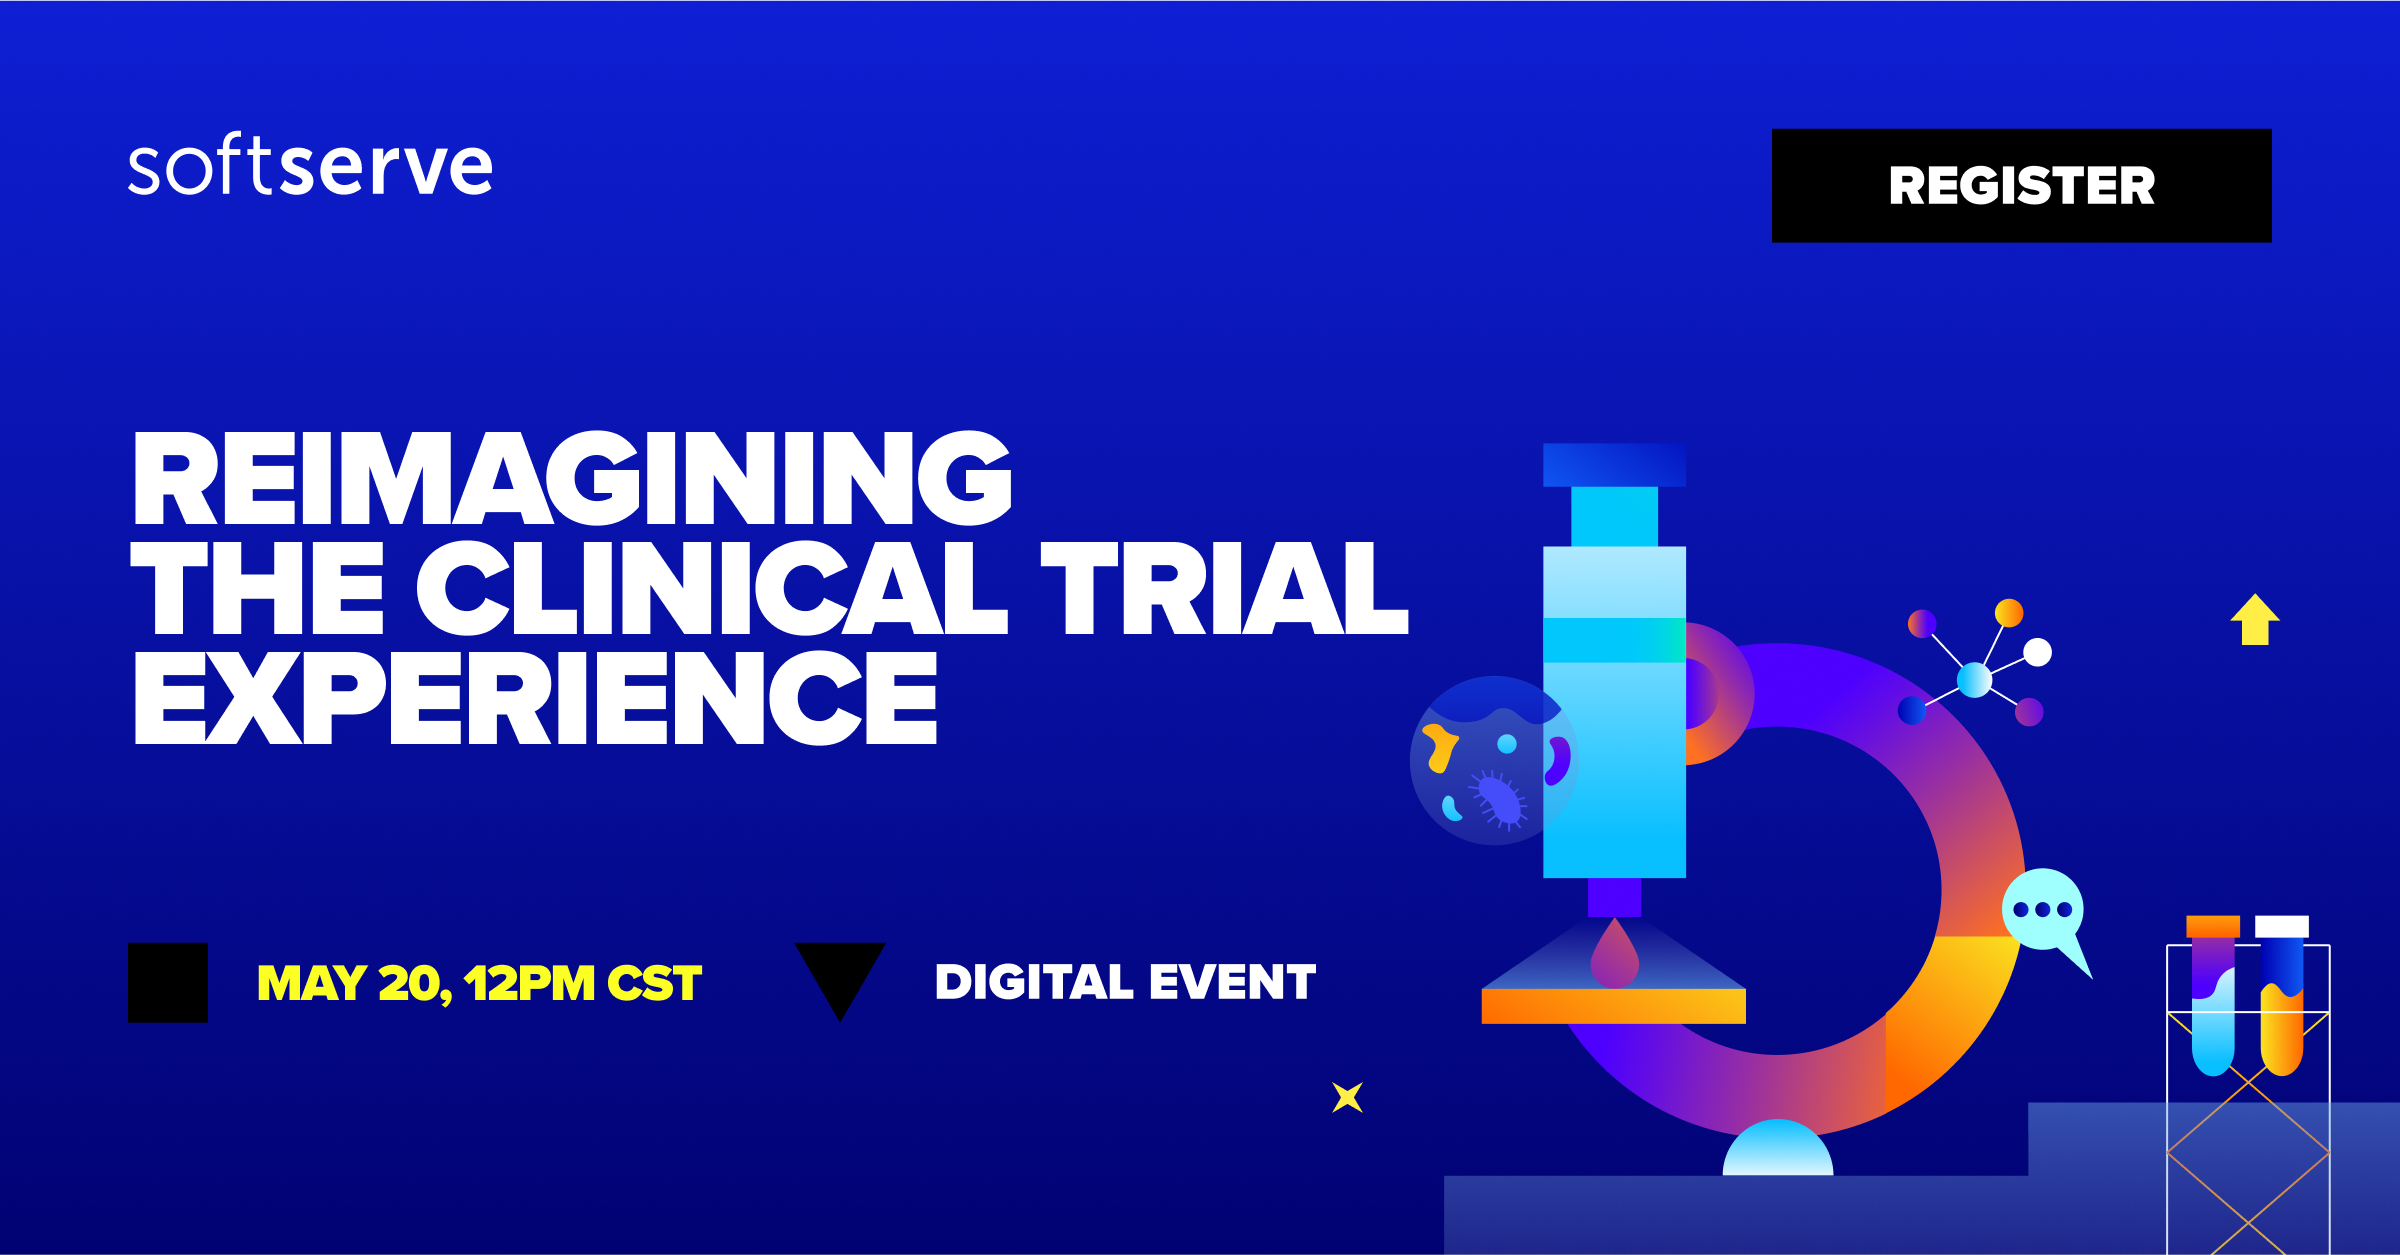 Reimagining The Clinical Trial Experience Events Softserve